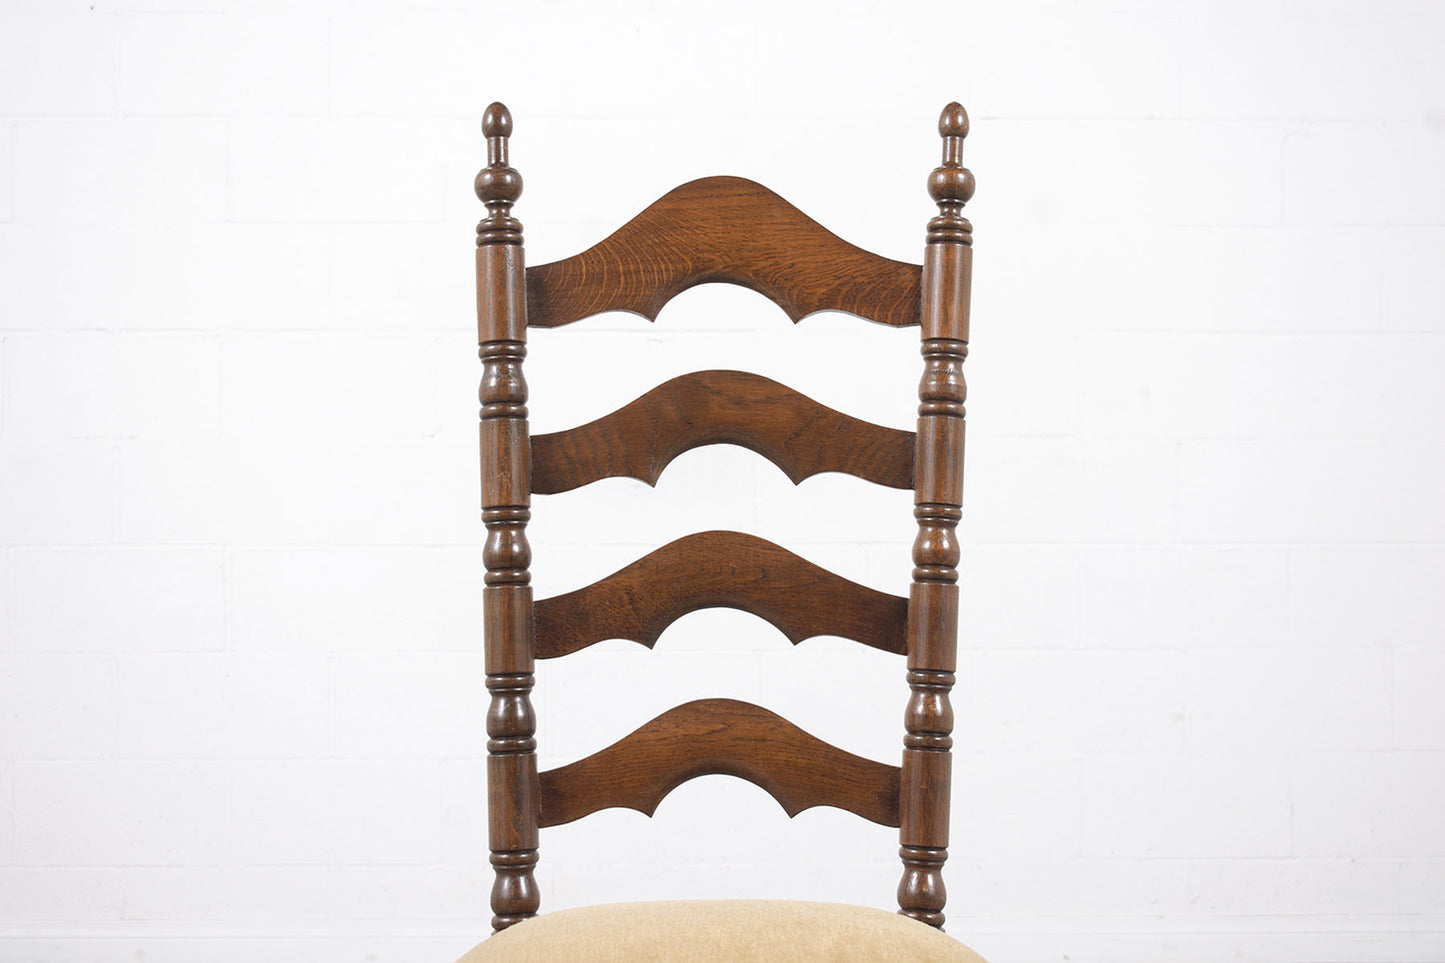 Vintage French Provincial Dining Chairs - Hand-Crafted 1900s Upholstery Set